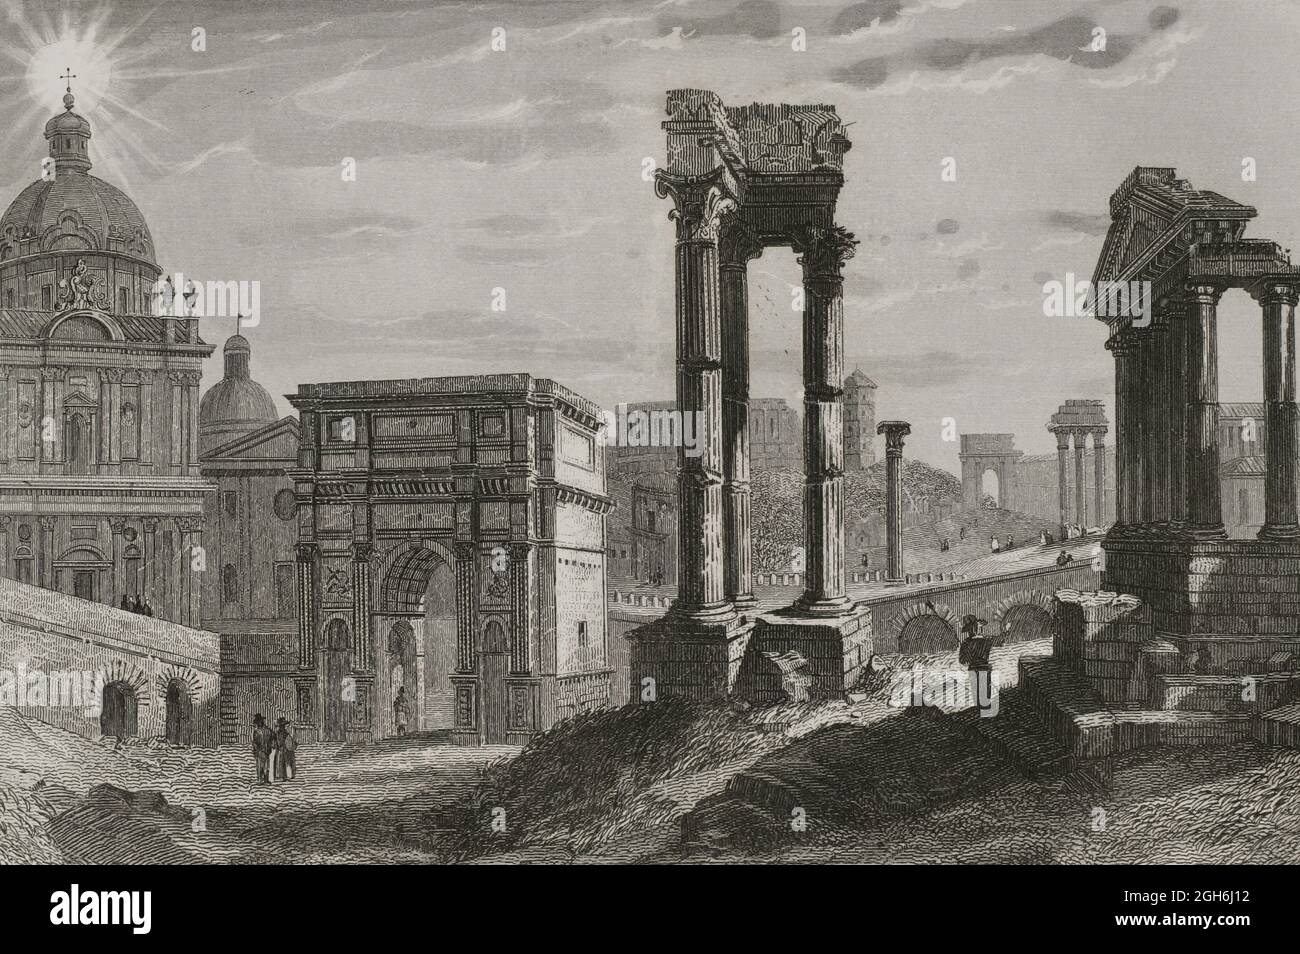 Italy, Rome. The new era inaugurated by the cross on the ruins of the Roman civilization. In the foreground the Arch of Septimus Severus in the Roman Forum. In the background the cross over the dome of the Santi Luca e Martina Church, Baroque style. Engraving by Antonio Roca. Las Glorias Nacionales. Volume I, Madrid-Barcelona edition, 1852. Stock Photo